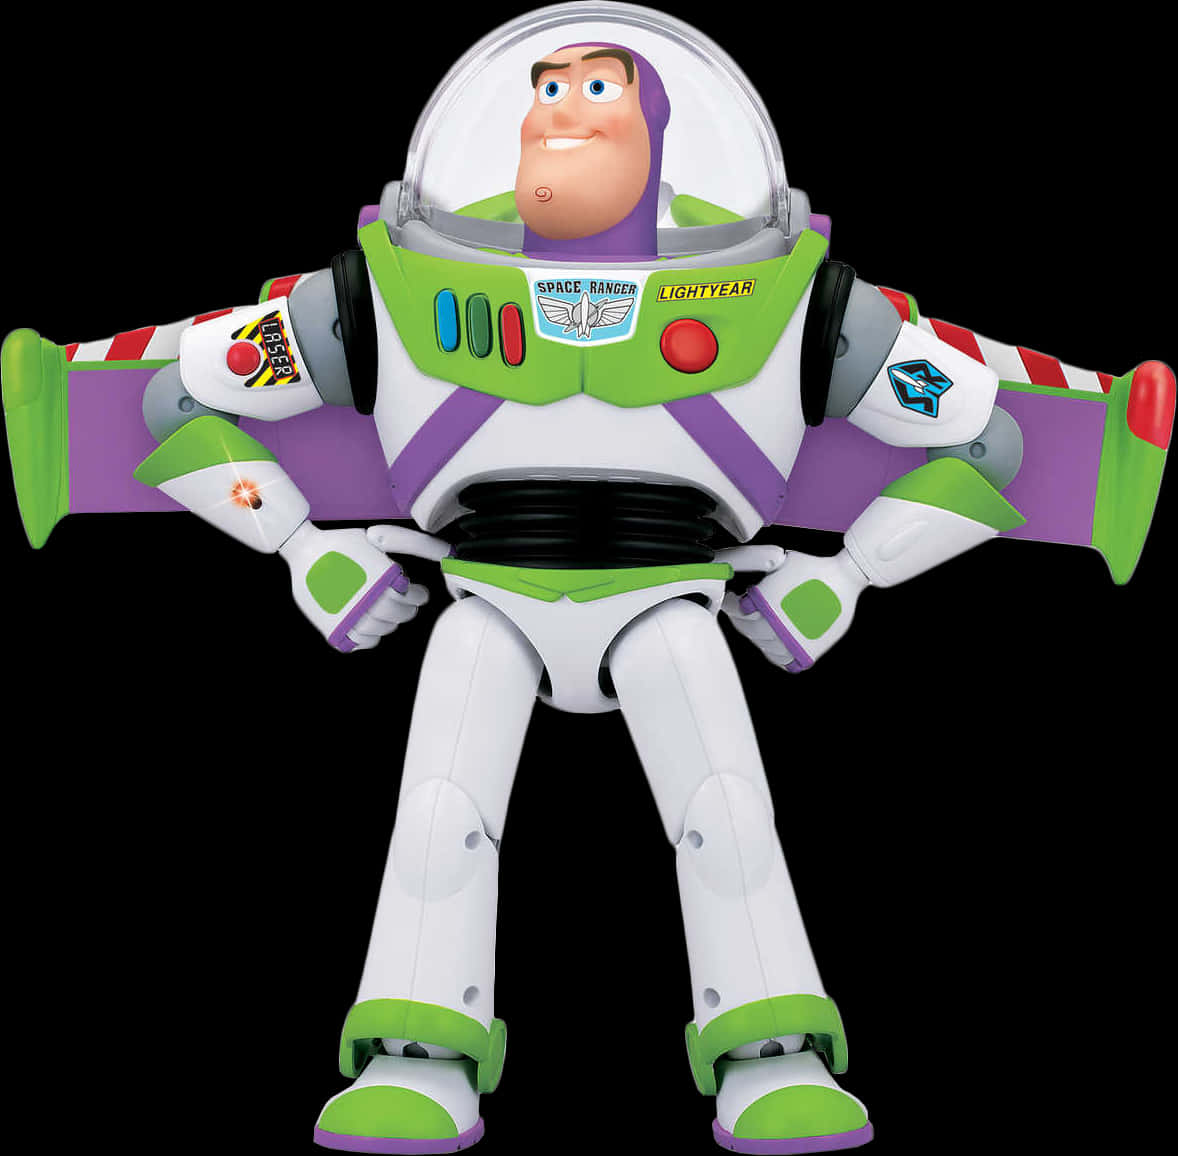 Buzz Lightyear Toy Pose PNG